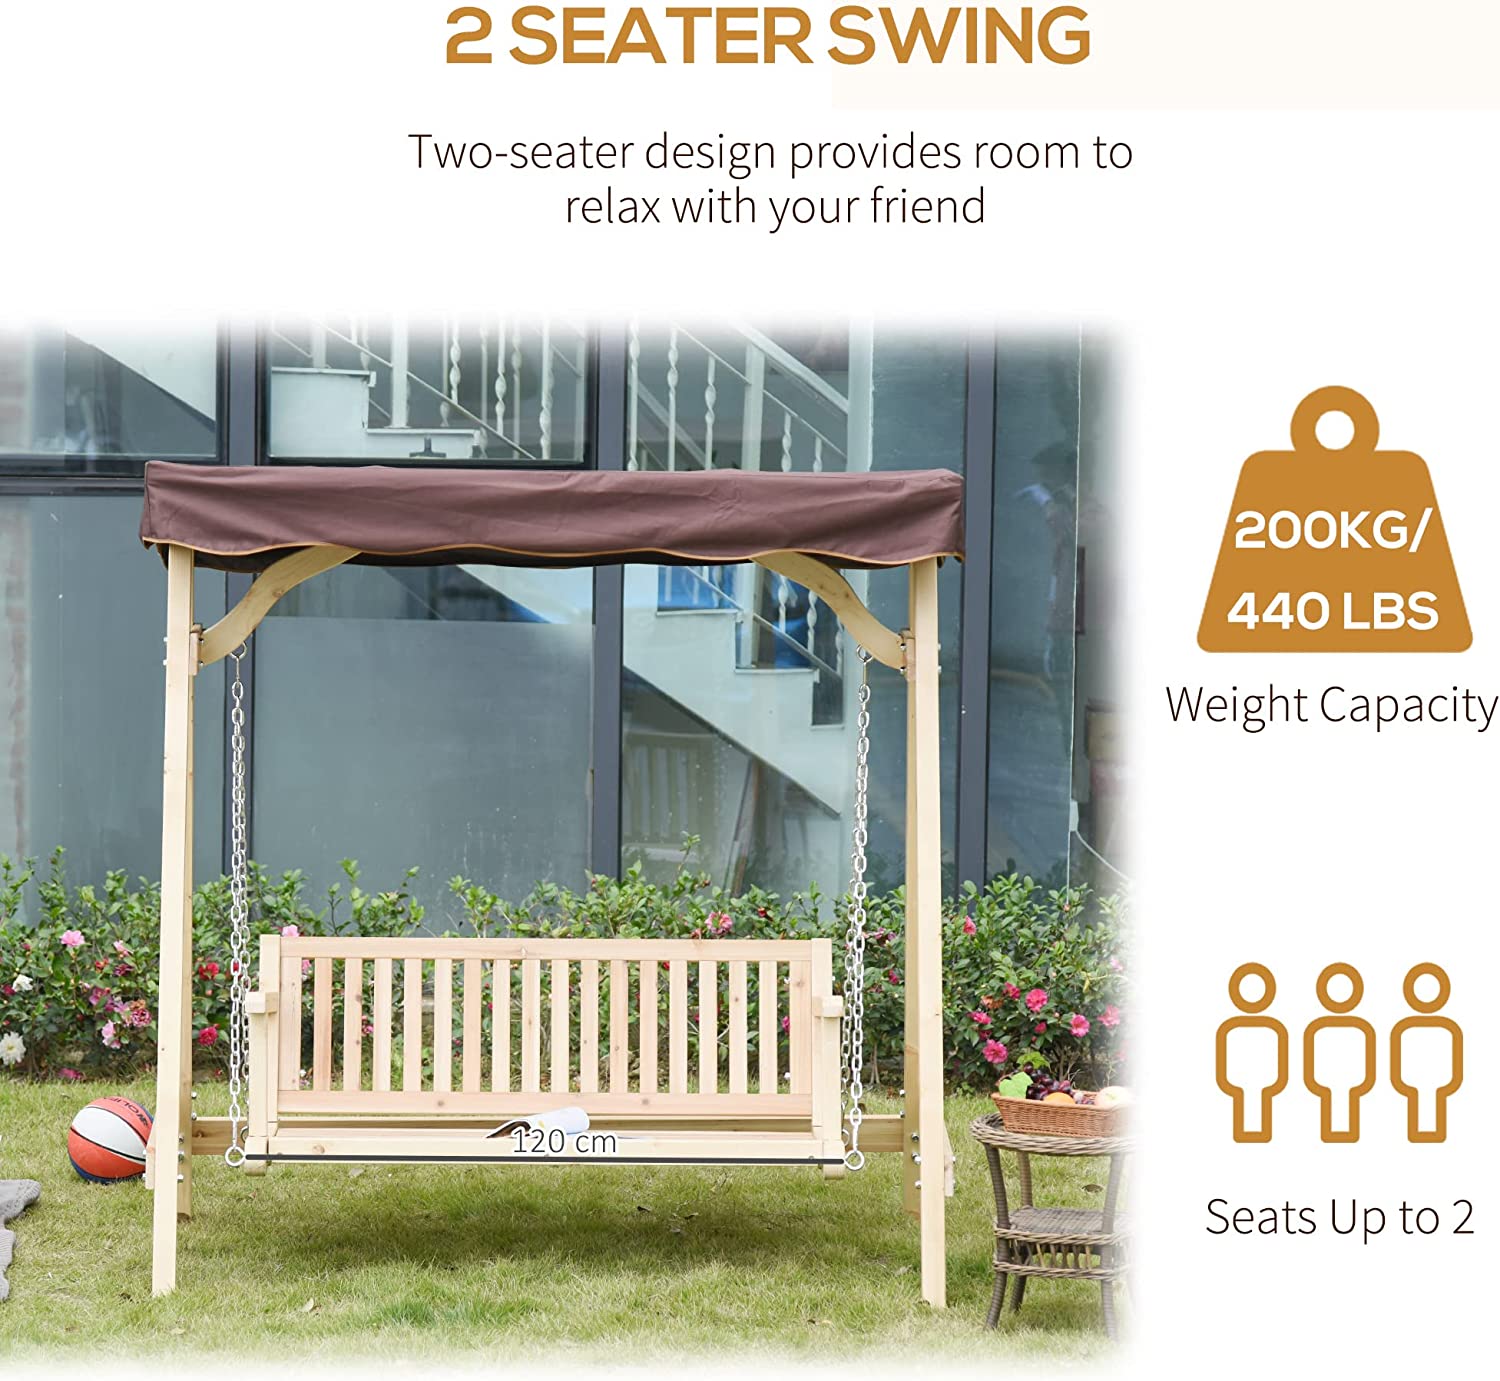 Chairliving 2-Person Outdoor Wooden Swing Bench Patio Swing Chair with Adjustable Canopy and Hanging Chain for Garden Backyard